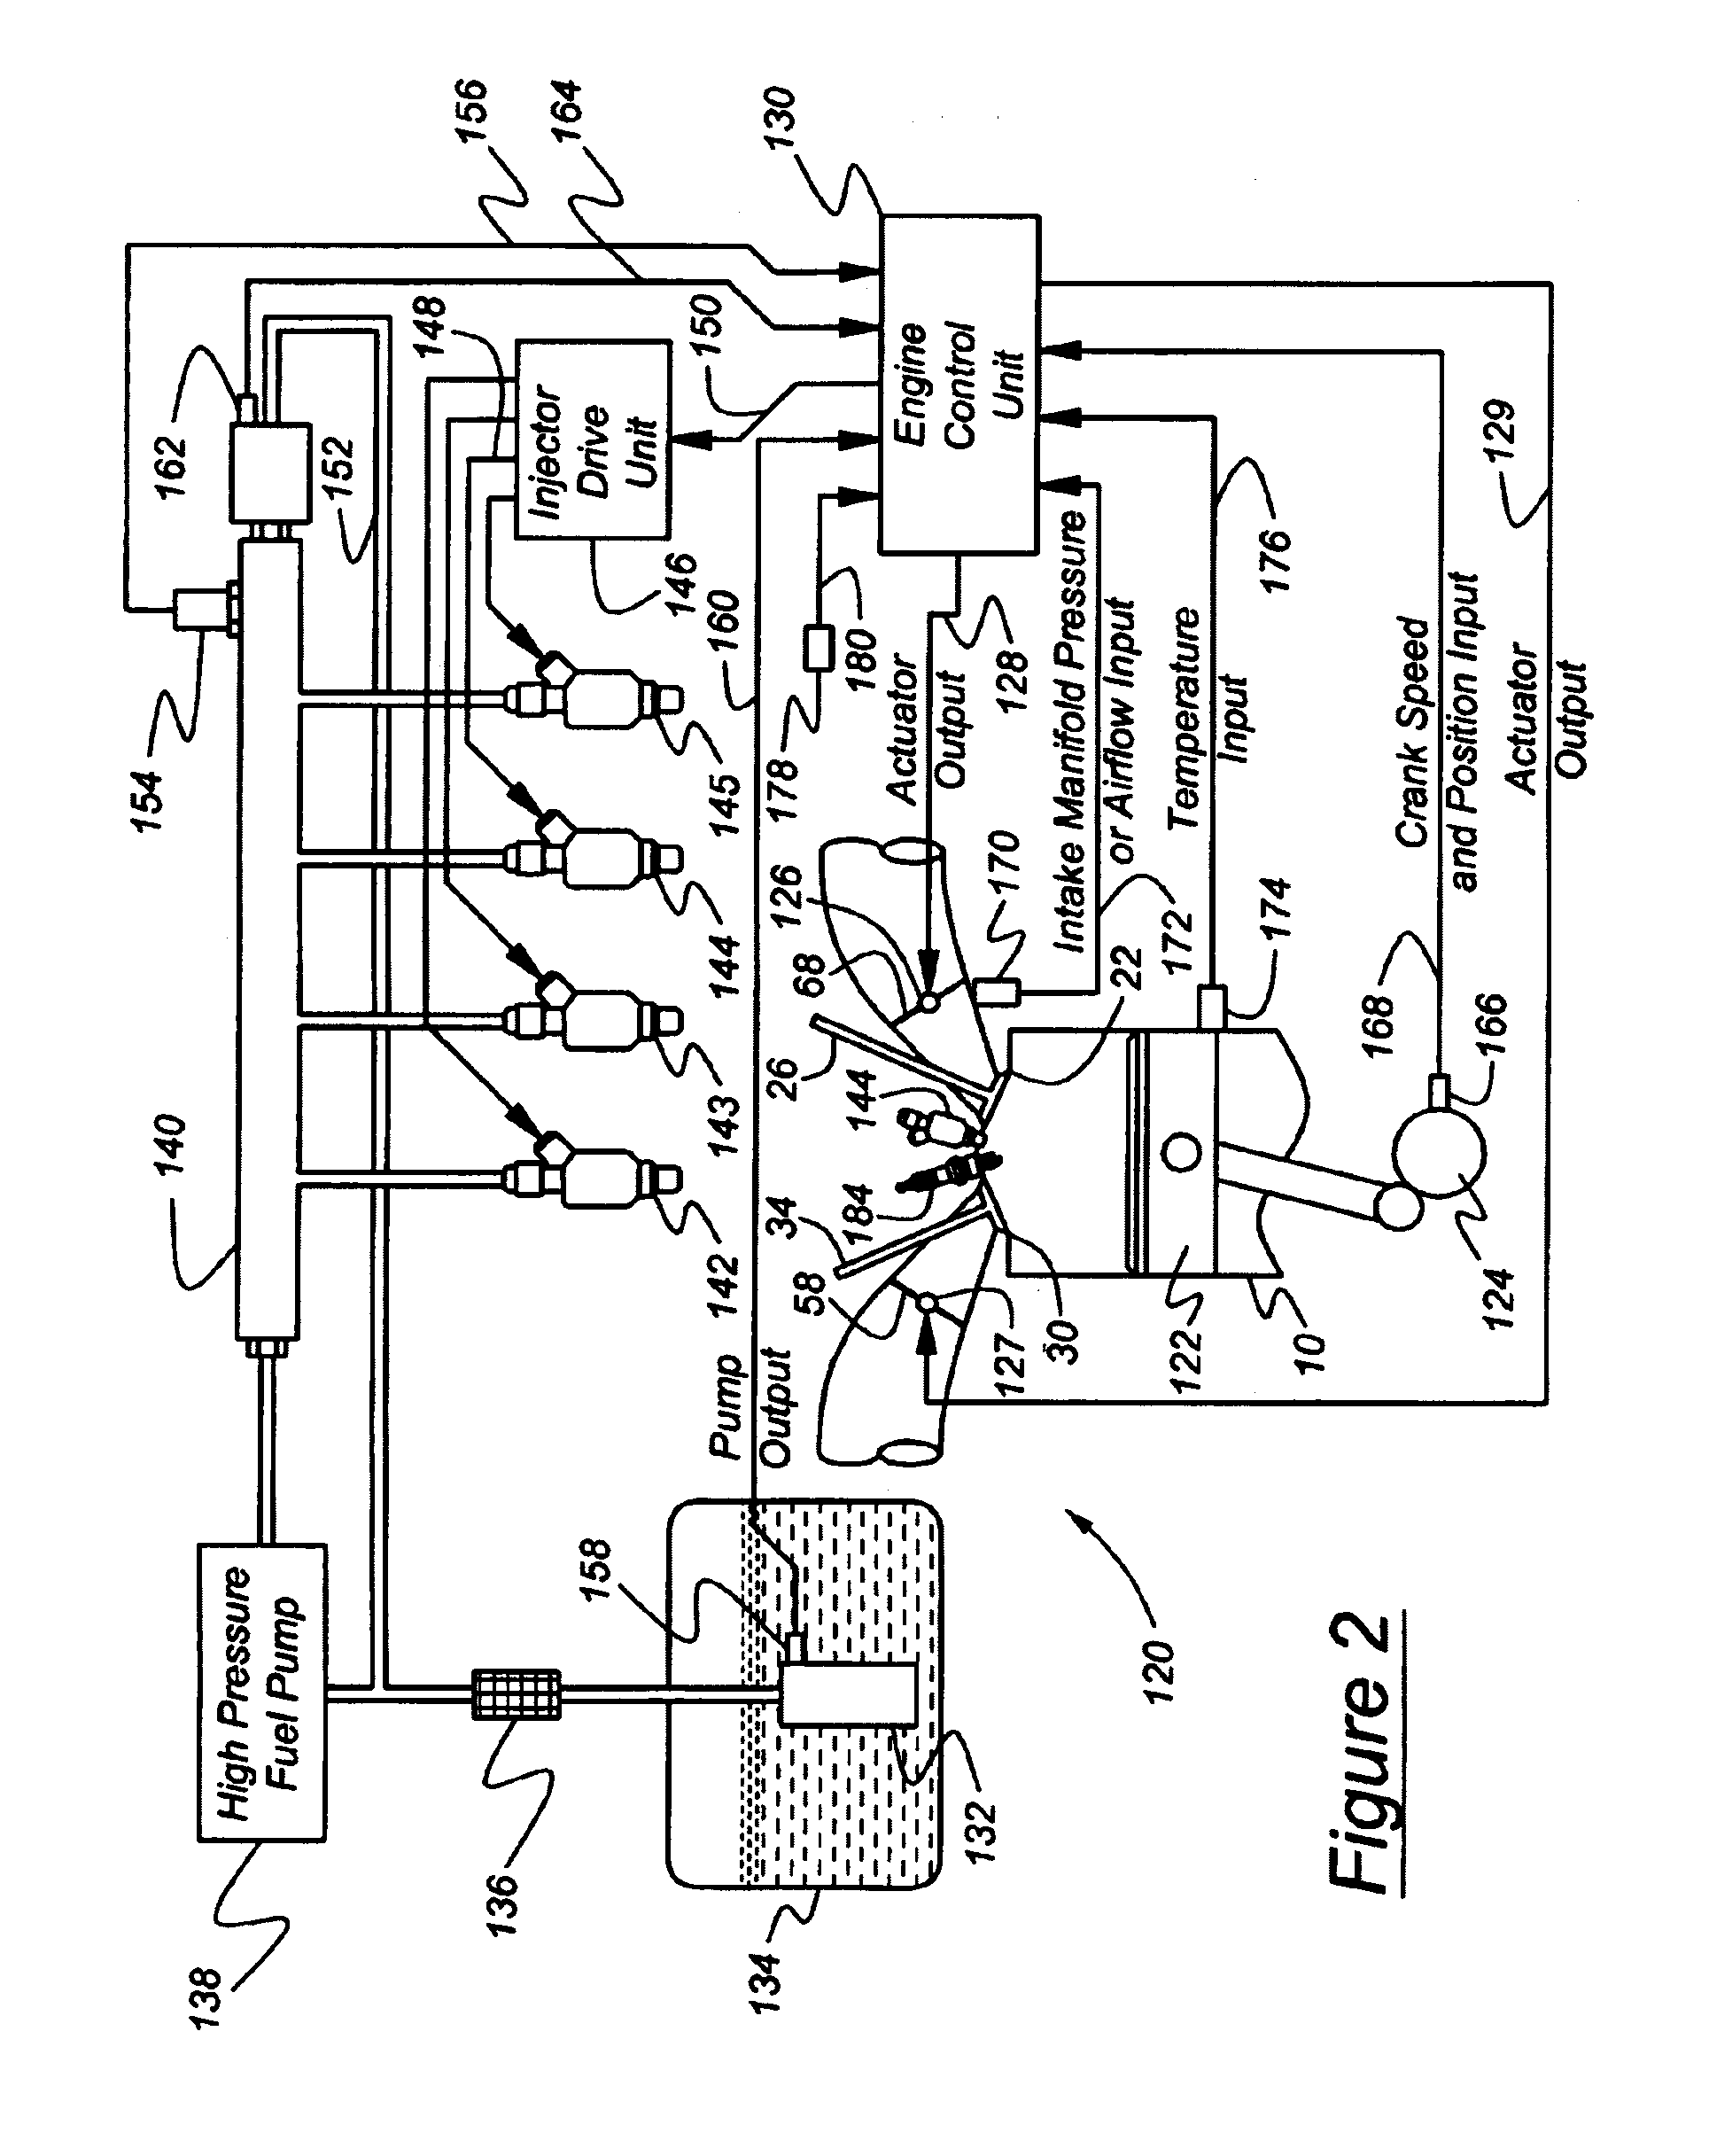 Indirect variable valve actuation for an internal combustion engine